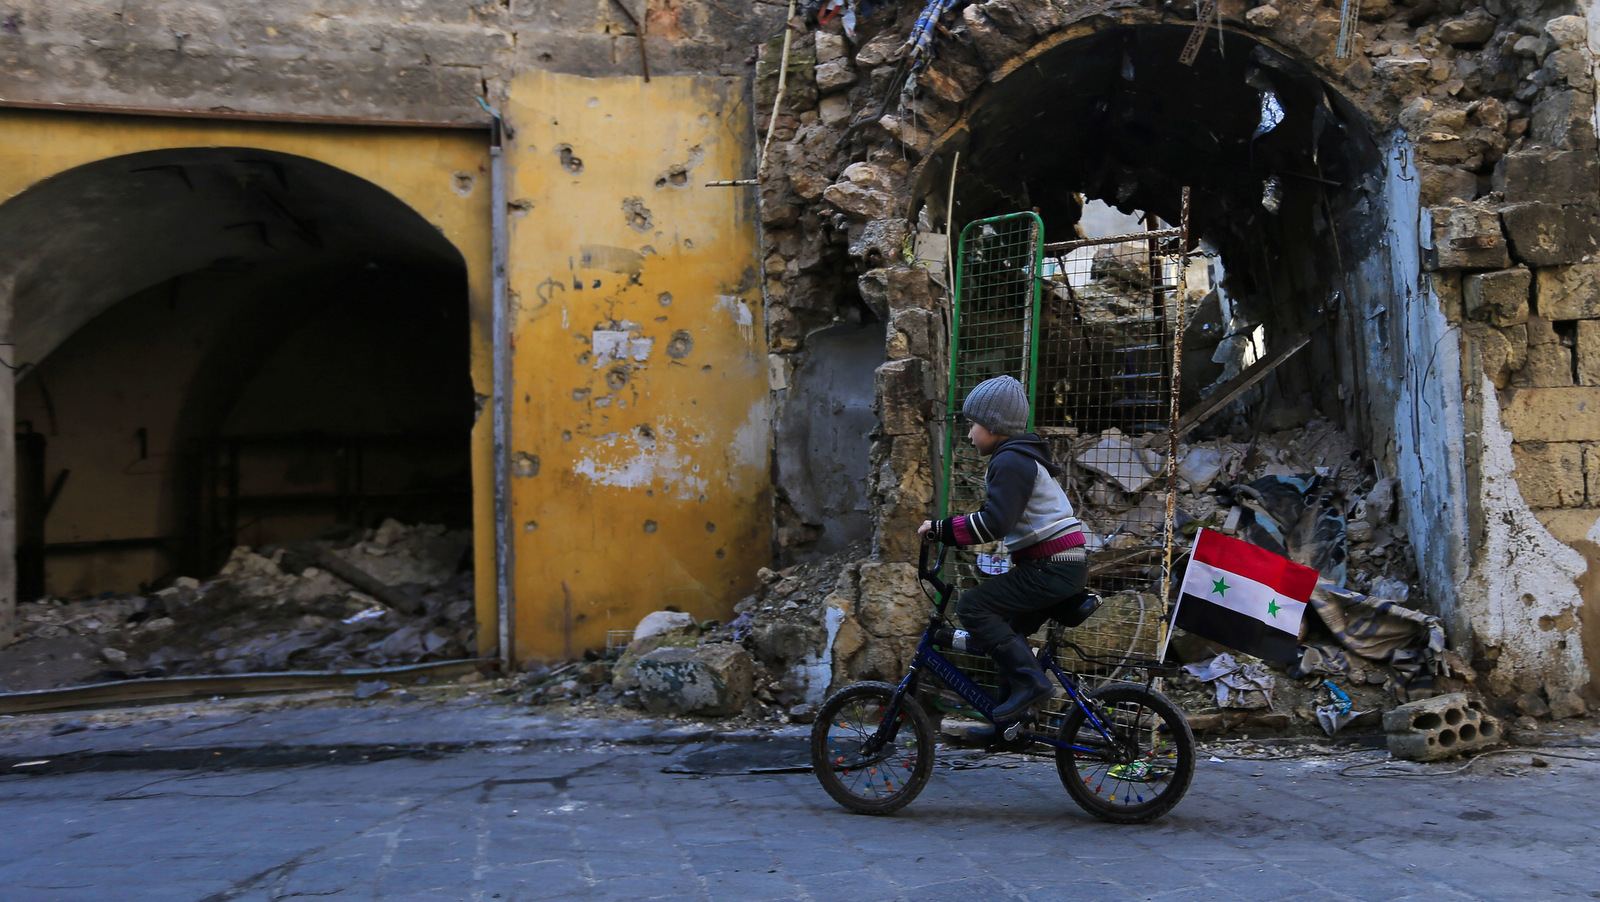 A young boy rides his bike through the destruction of the once Jalloum neighborhood in the eastern Aleppo, Syria after it was liberated from Syrian rebels, Jan. 20, 2017. (AP/Hassan Ammar)